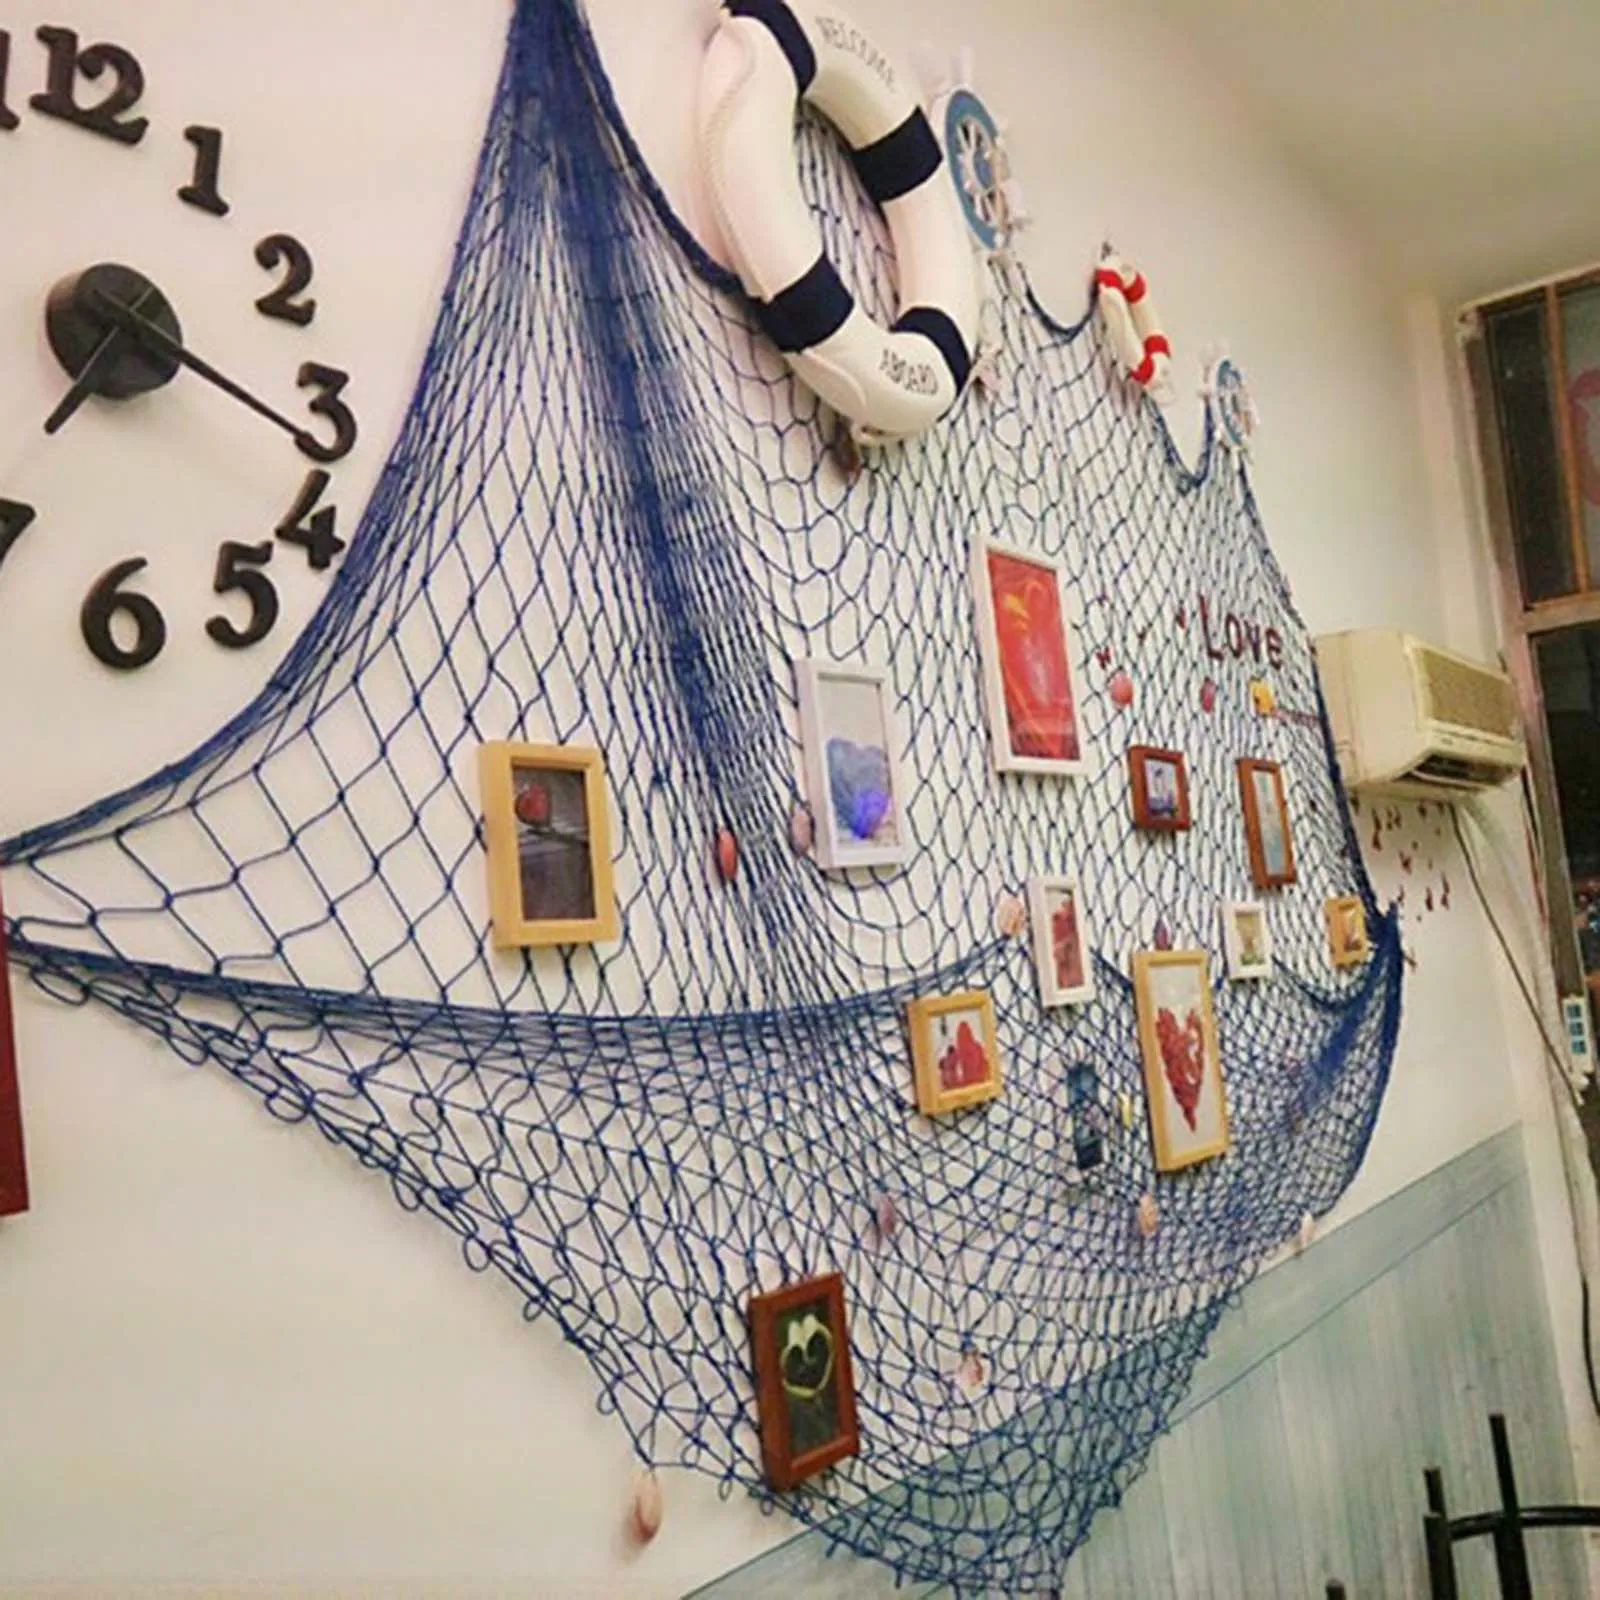 Photo about Decorations And Design - Fishing net decorating the